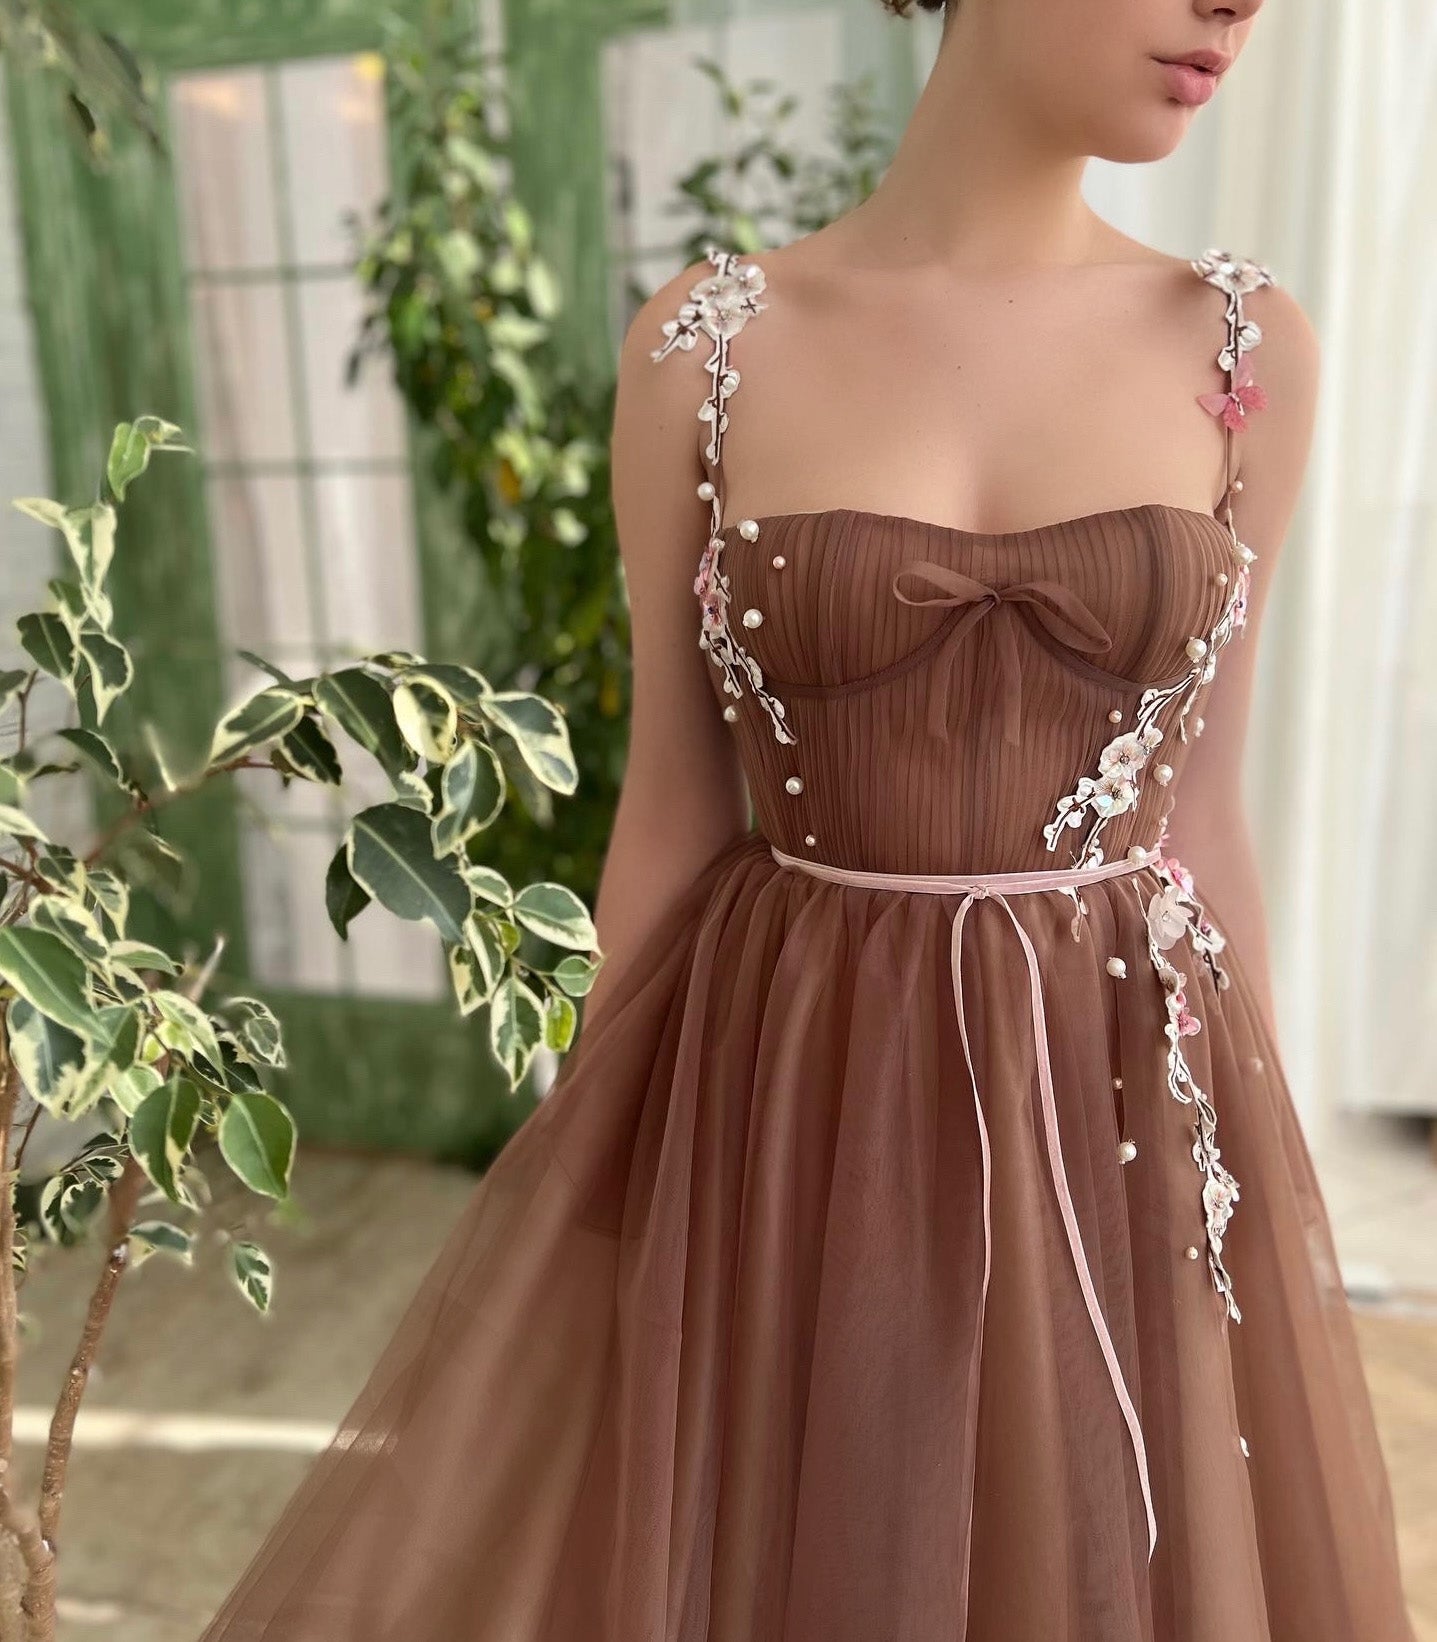 Brown A-Line dress with spaghetti straps and embroidery